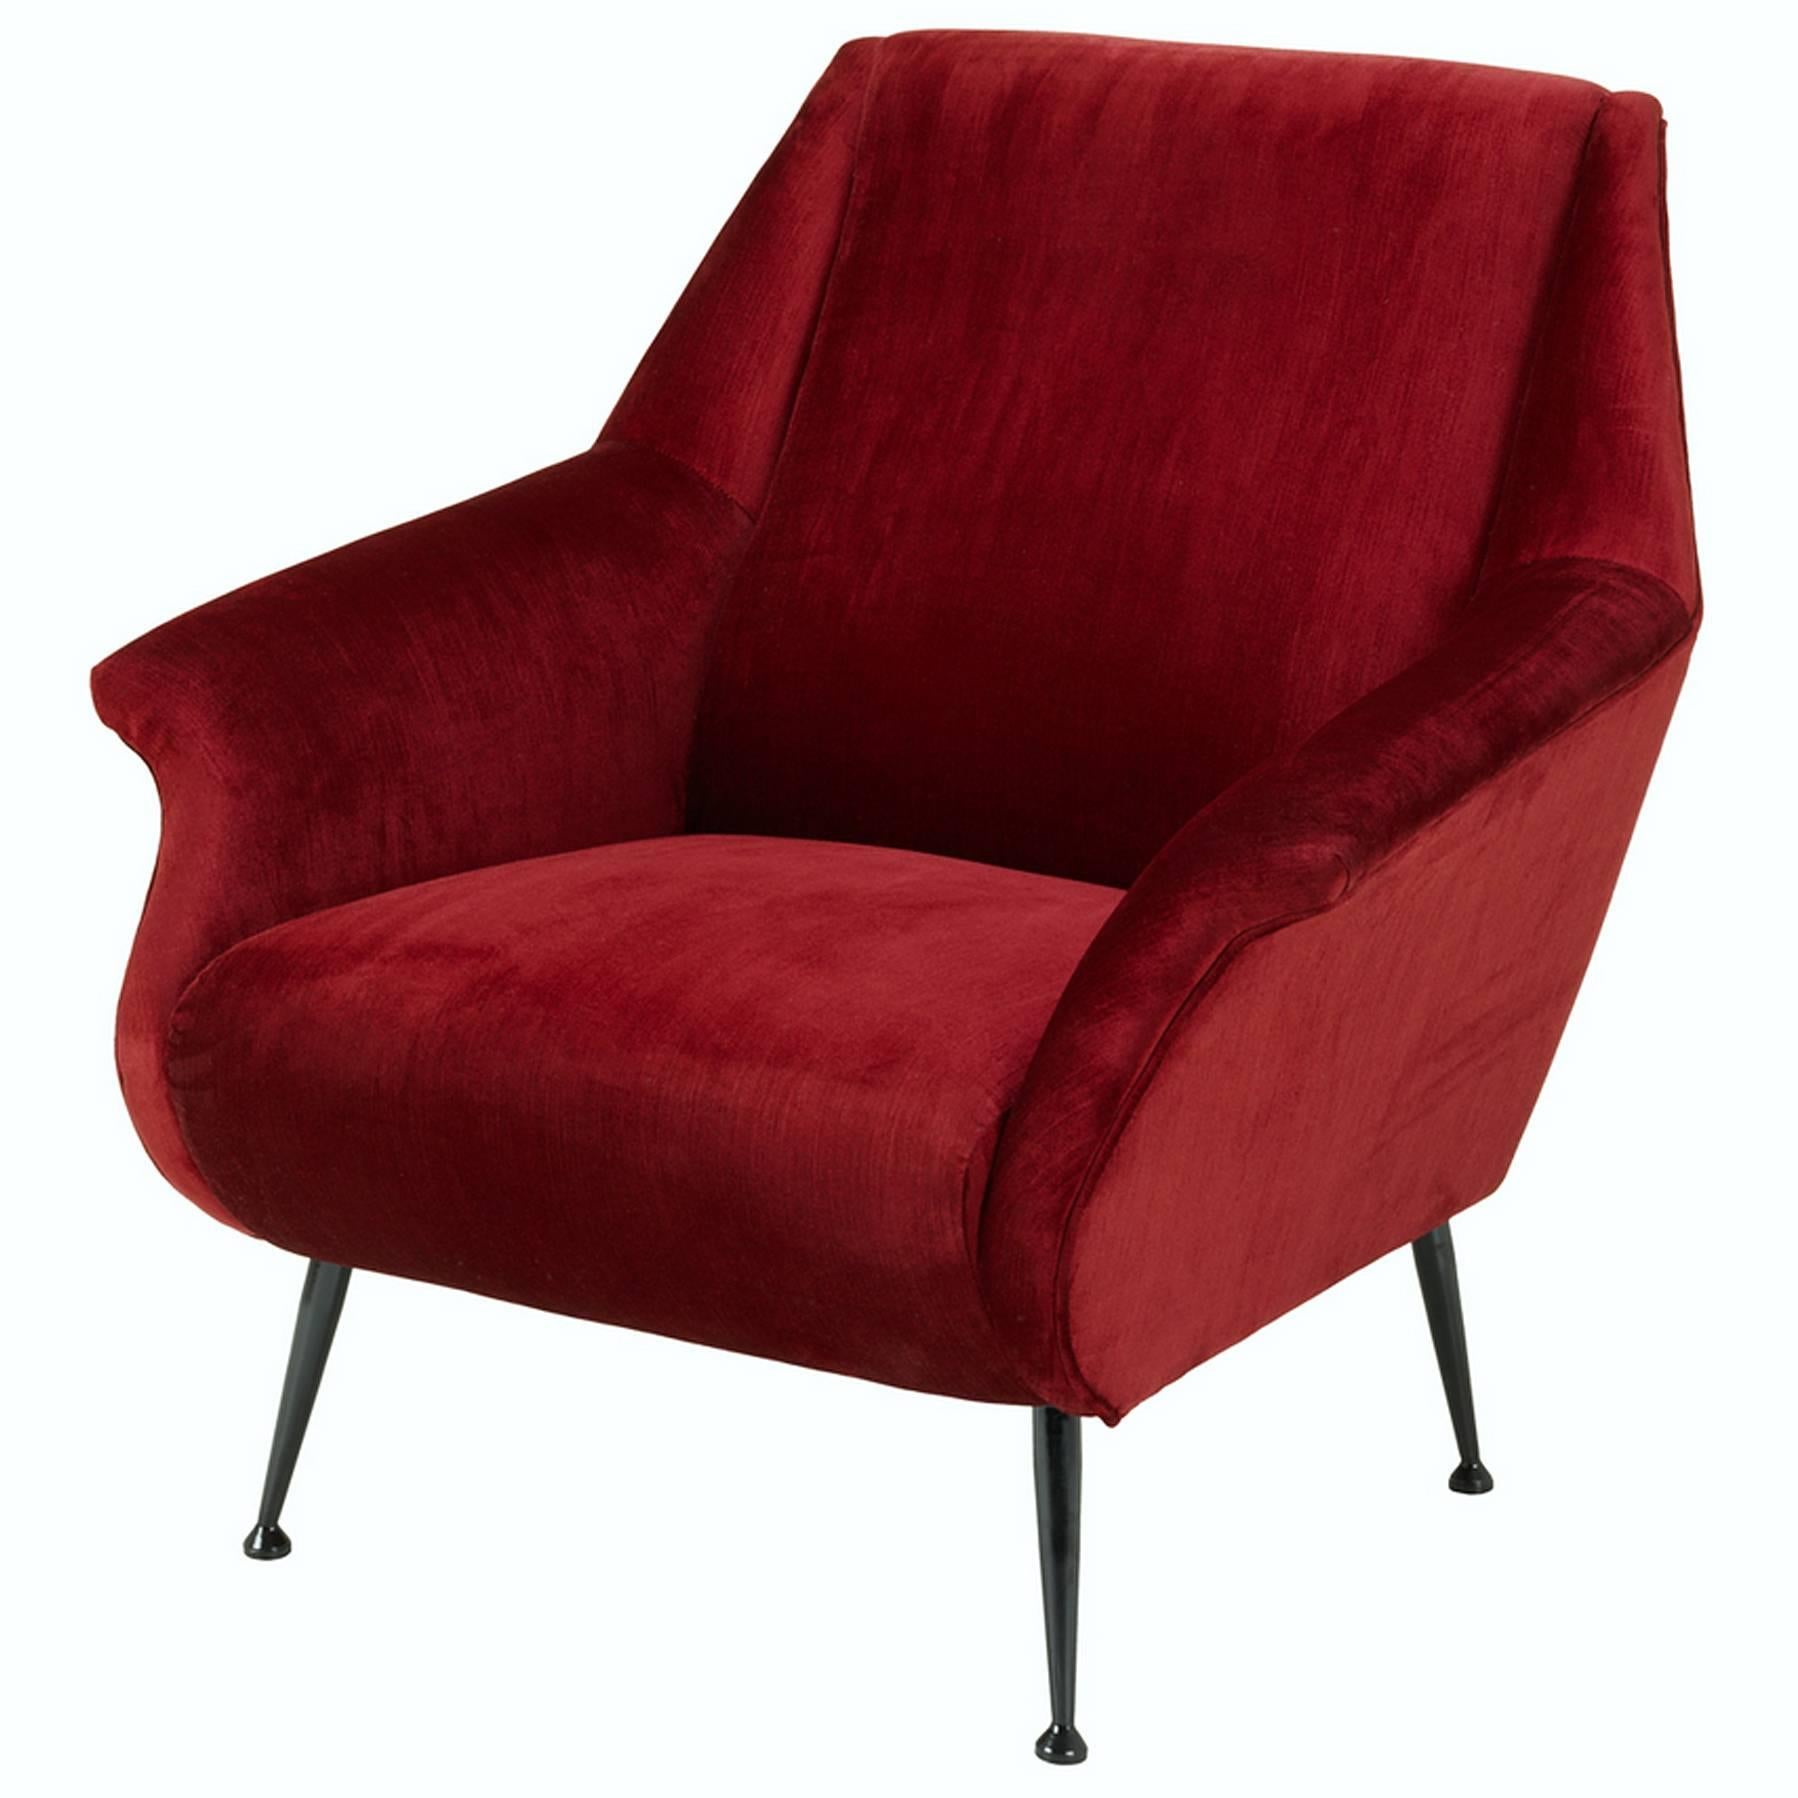 Red Lounge Chair with Red Essex Fabric and Bronze Legs